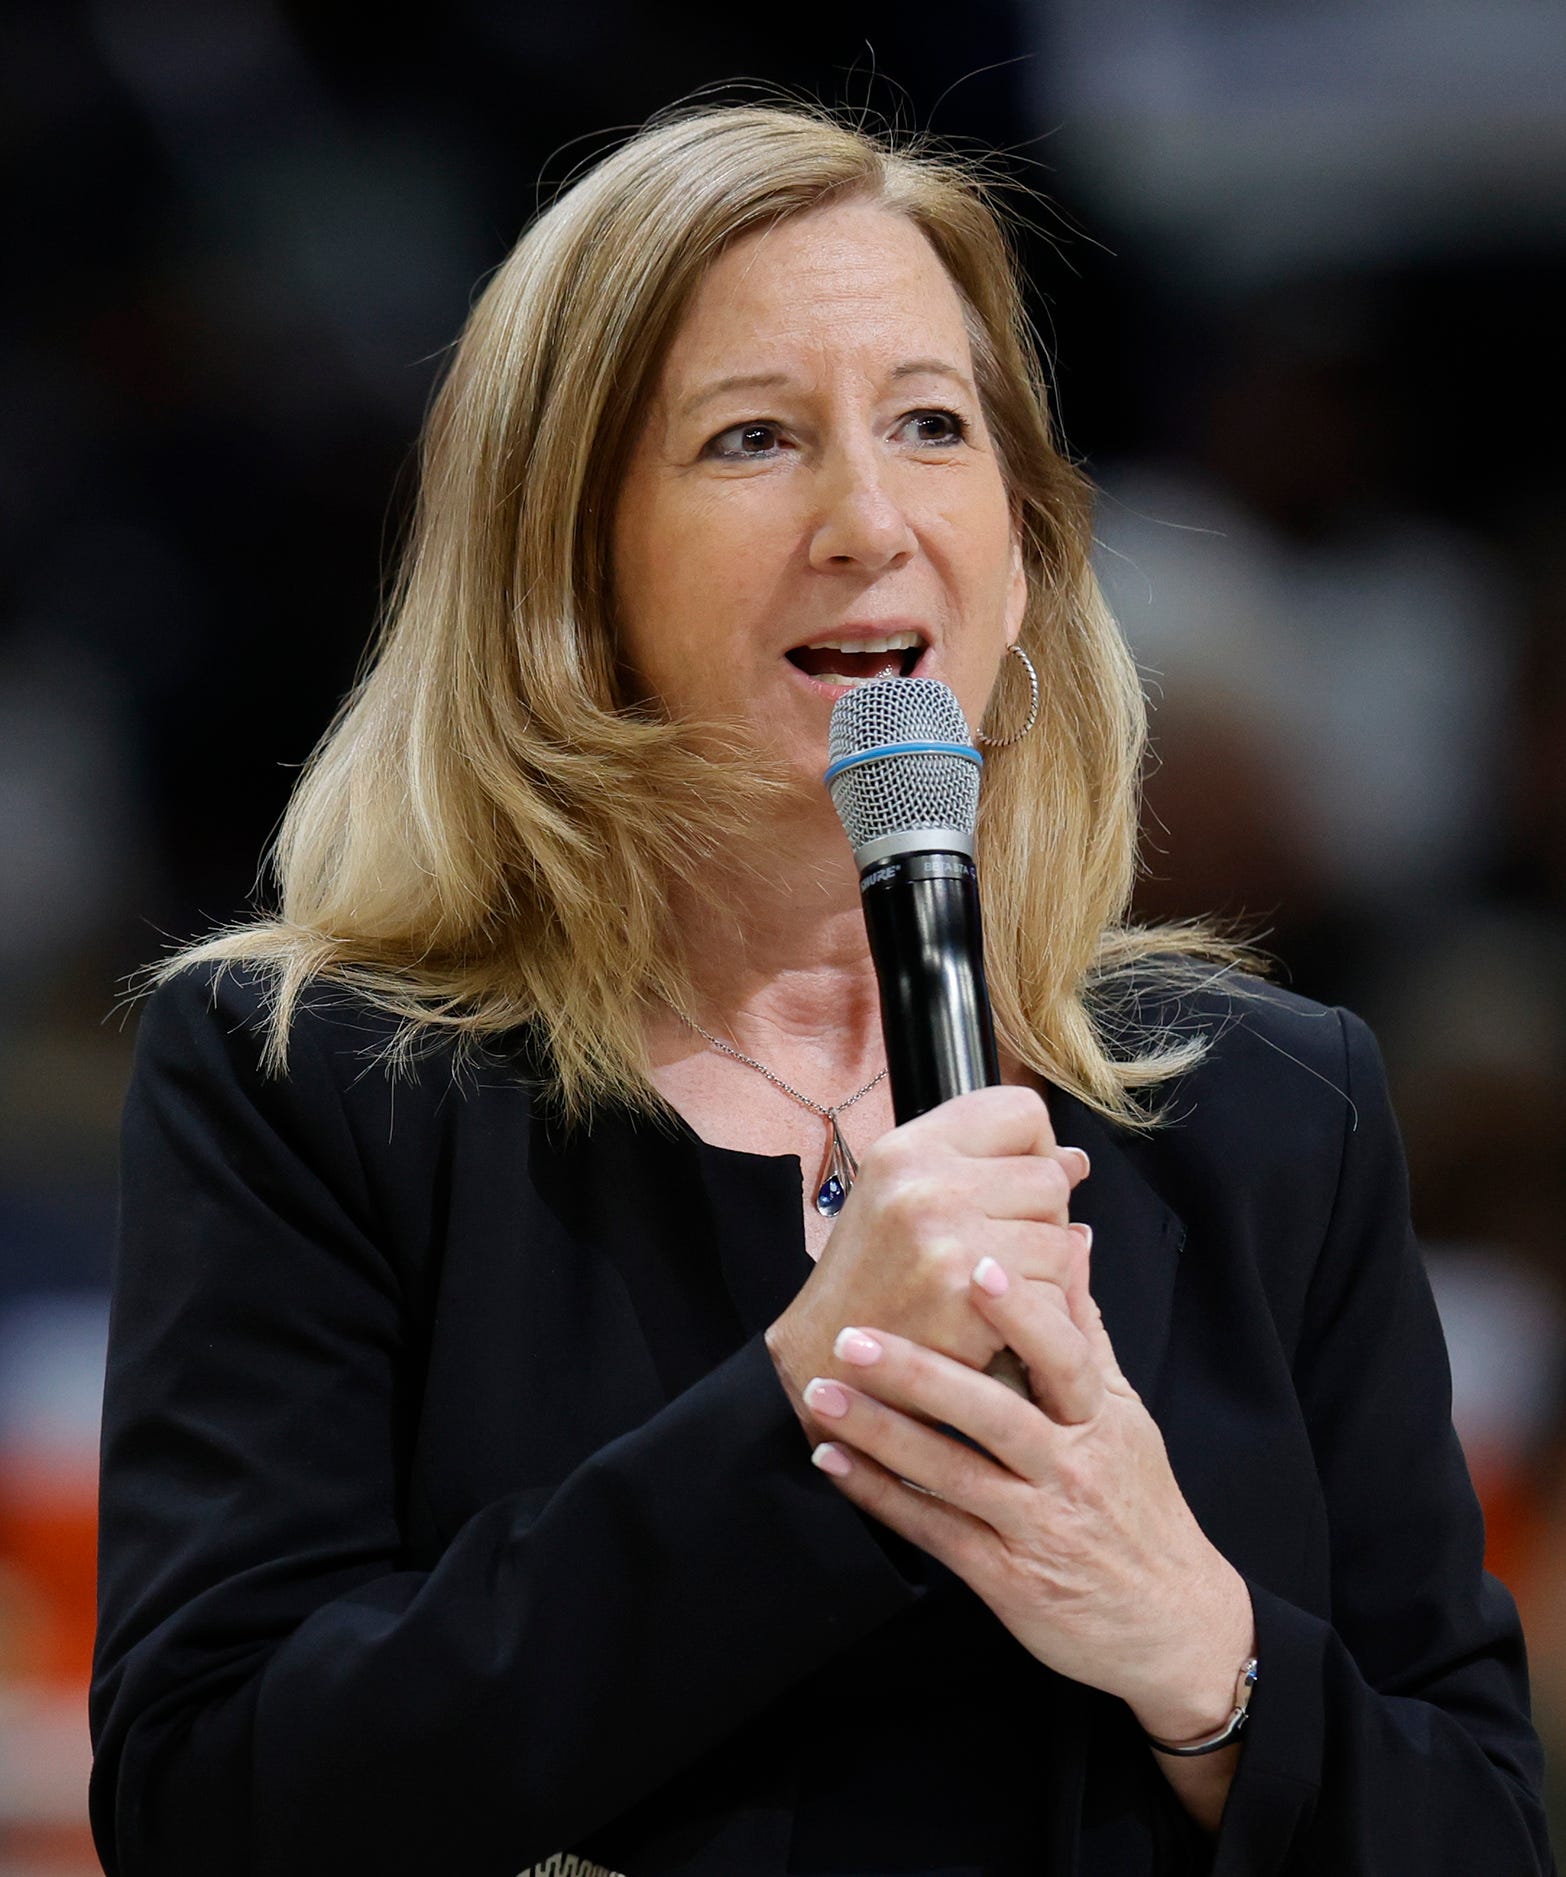 WNBA commissioner Cathy Engelbert said the league will reimburse travel expenses for players who go out of state for reproductive healthcare.